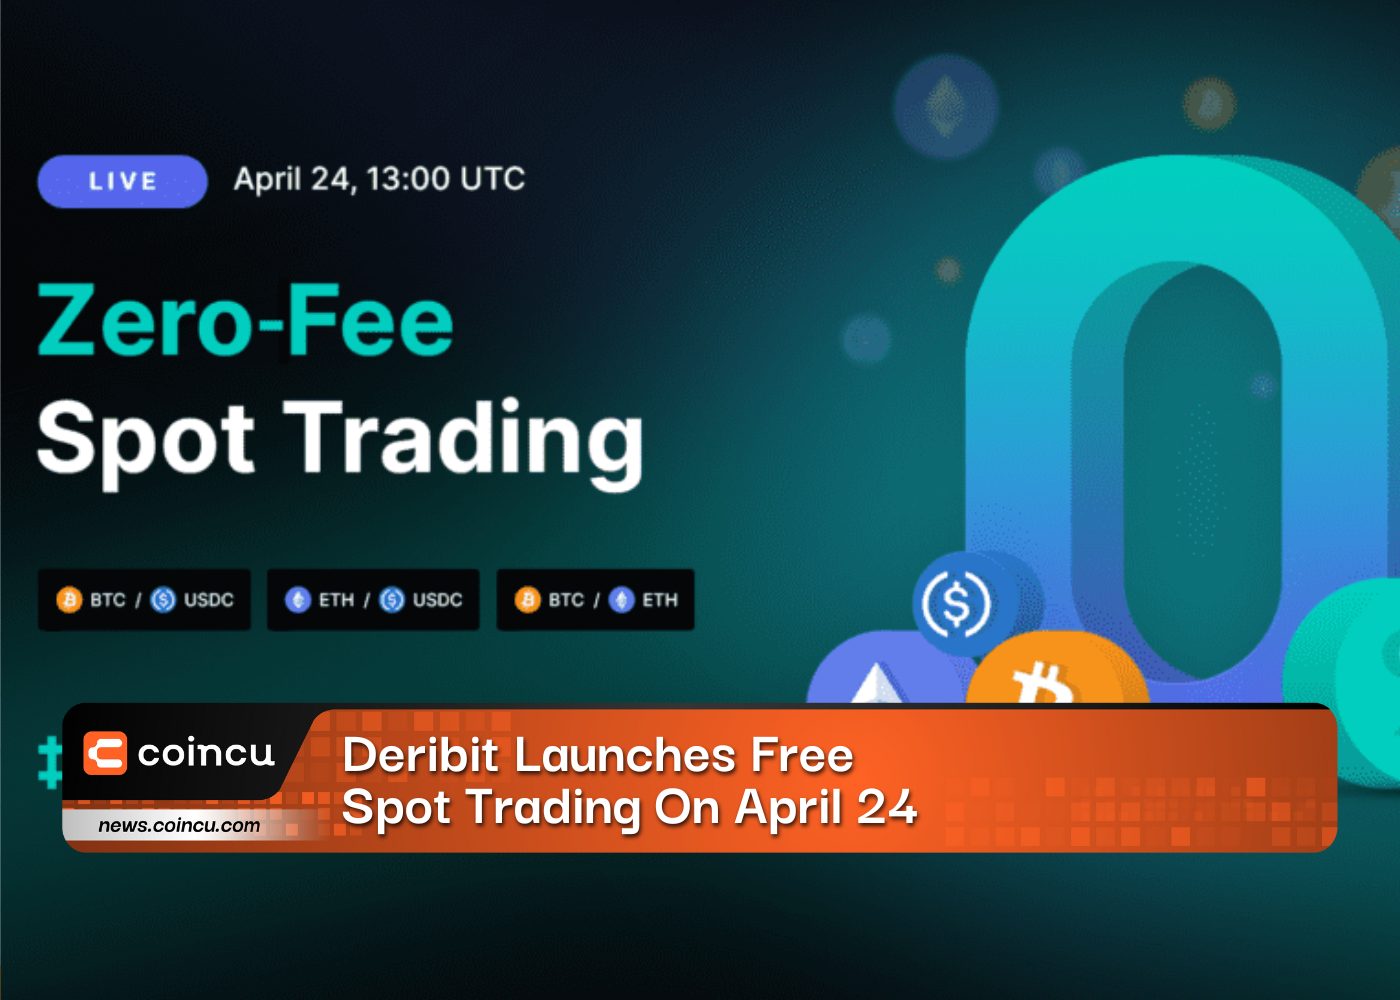 Deribit Launches Free Spot Trading On April 24